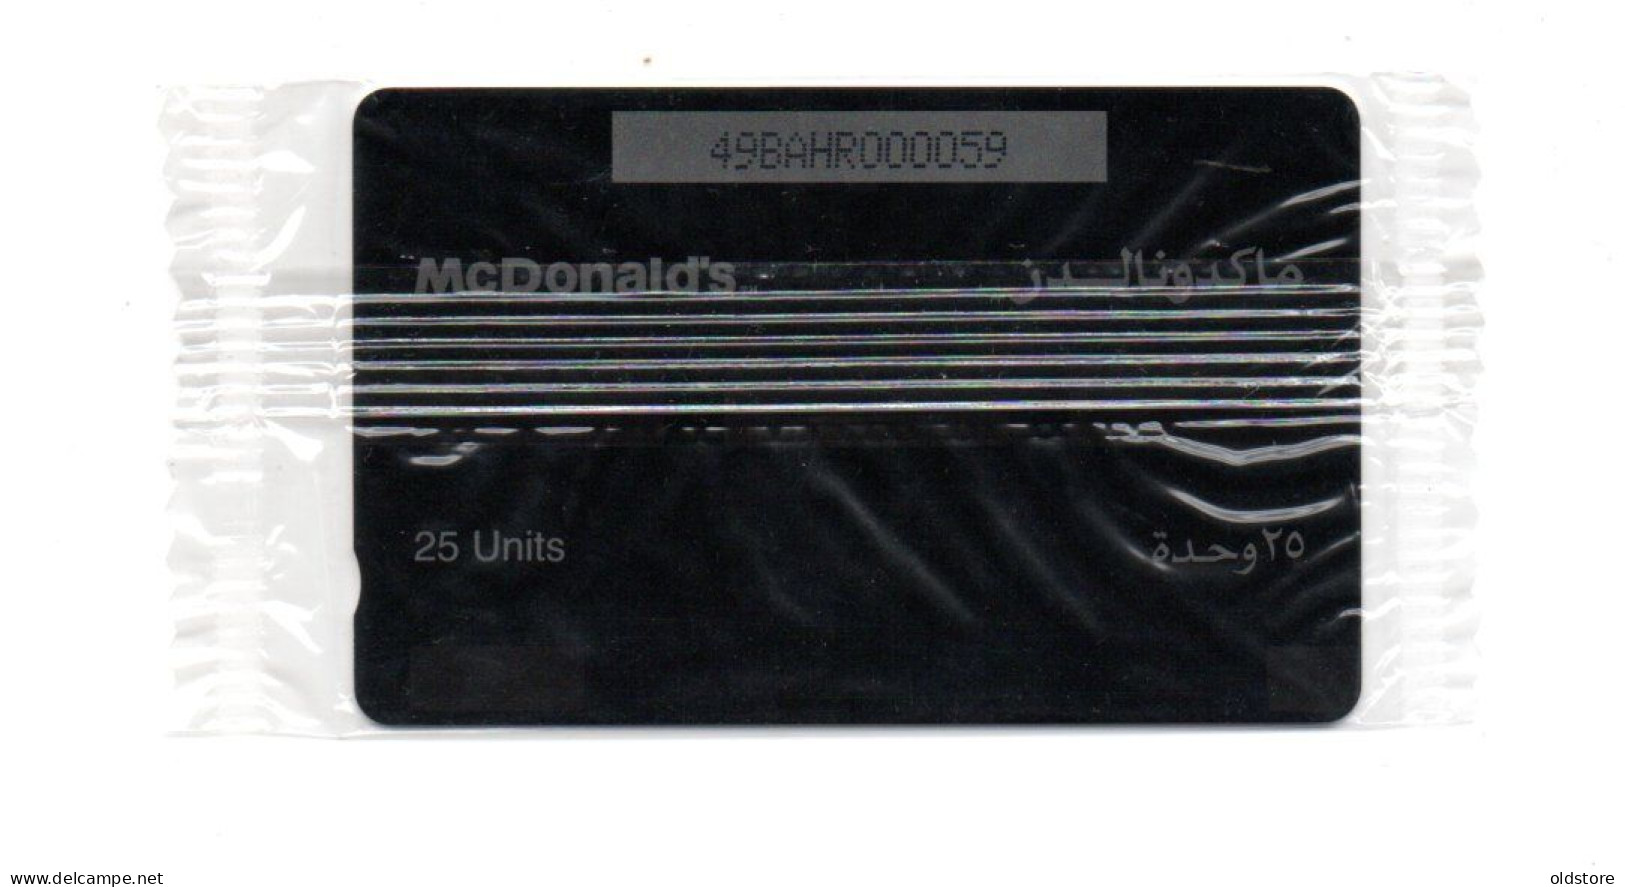 Bahrain Phonecards - Bahrain McDonald's Restaurant Offer Card Mint With Low Serial Number 000059  - Batelco -  ND 2001 - Bahreïn